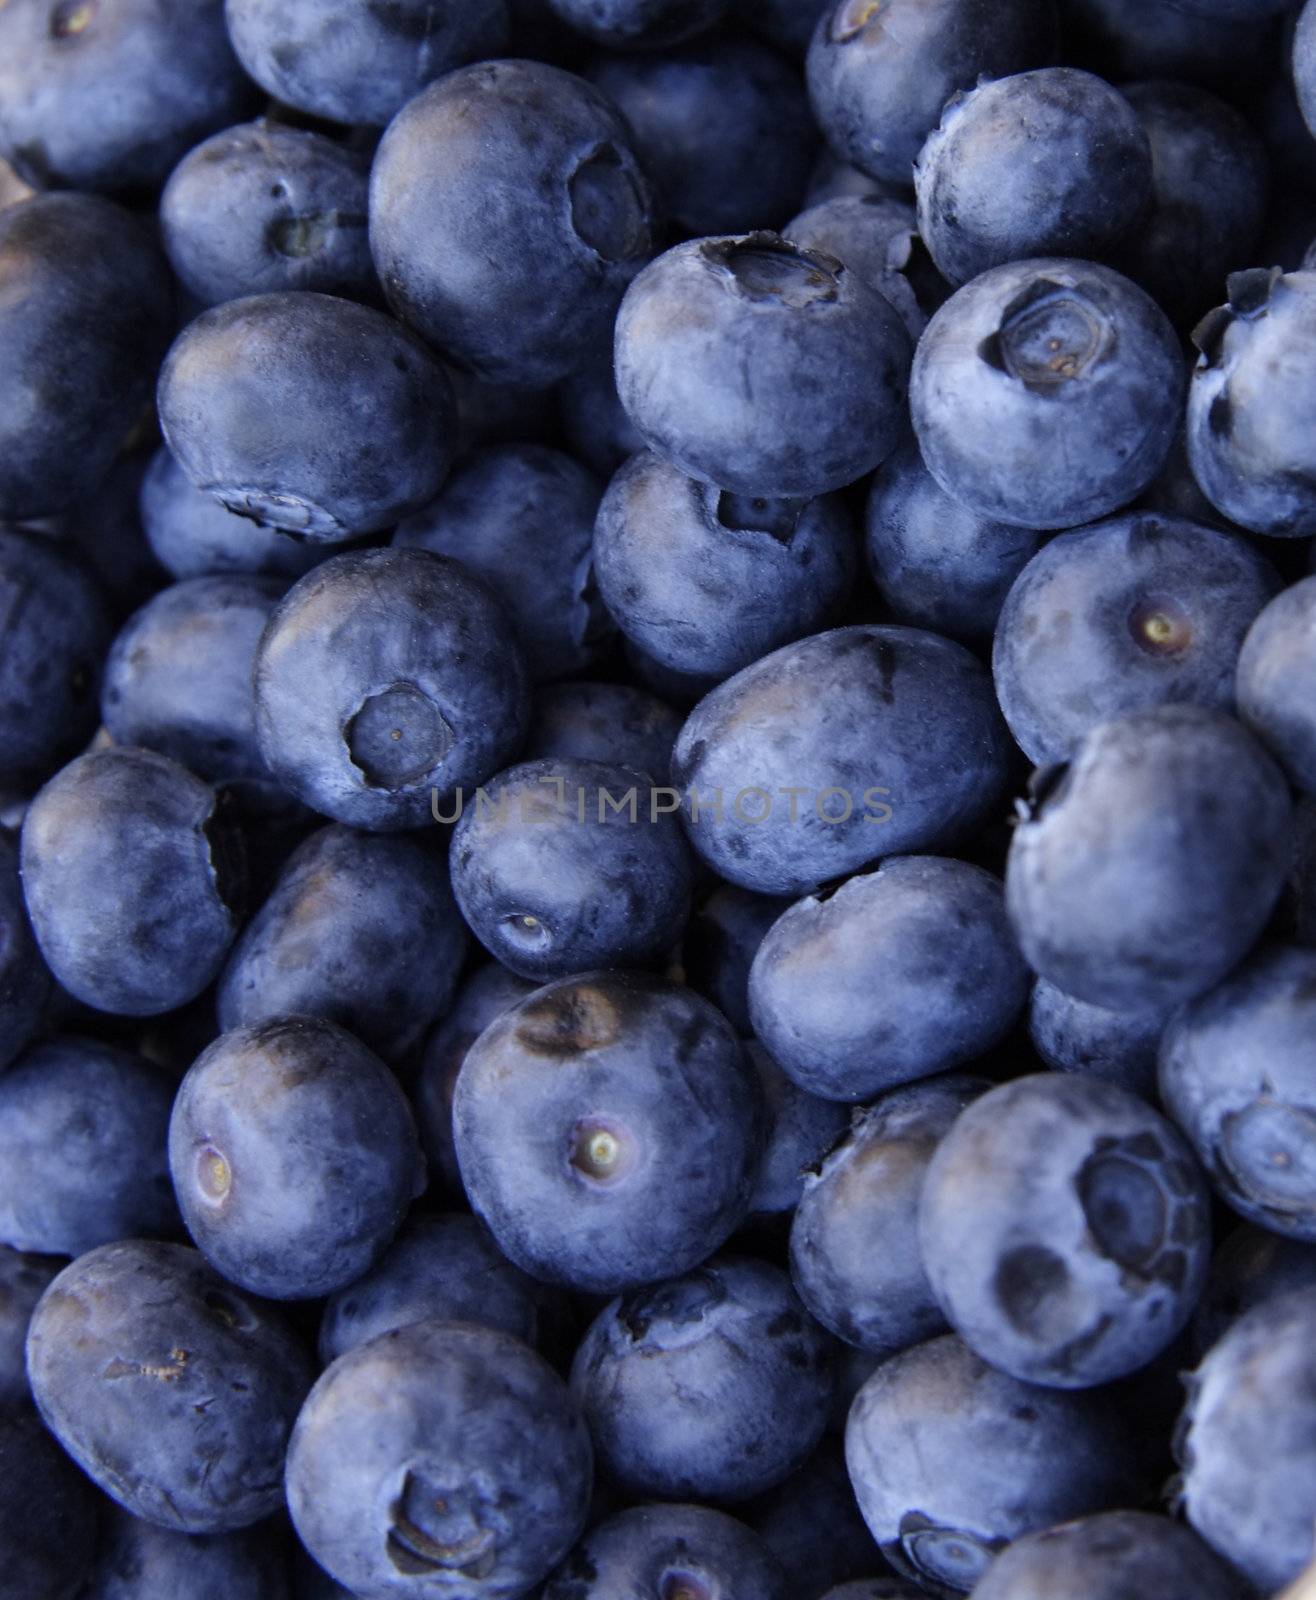 blue berries by leafy